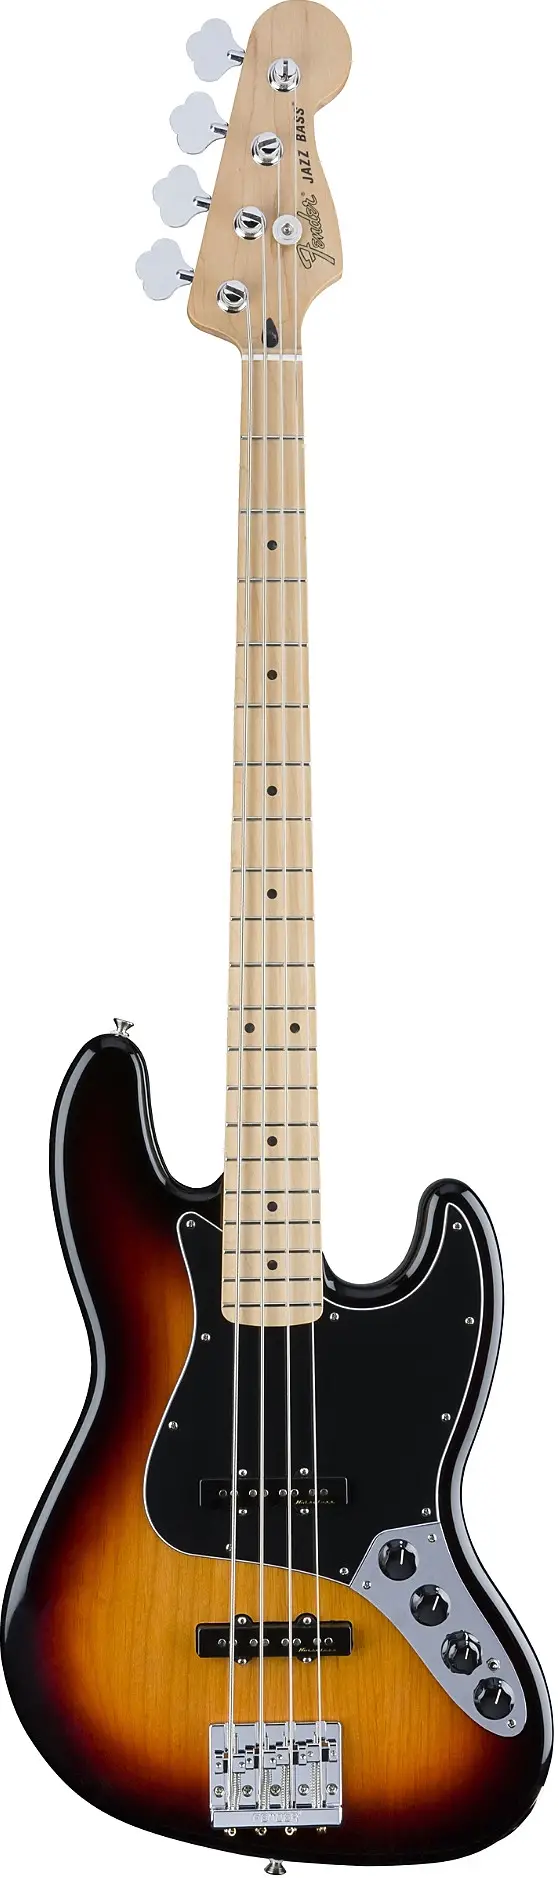 2017 Deluxe Active Jazz Bass by Fender